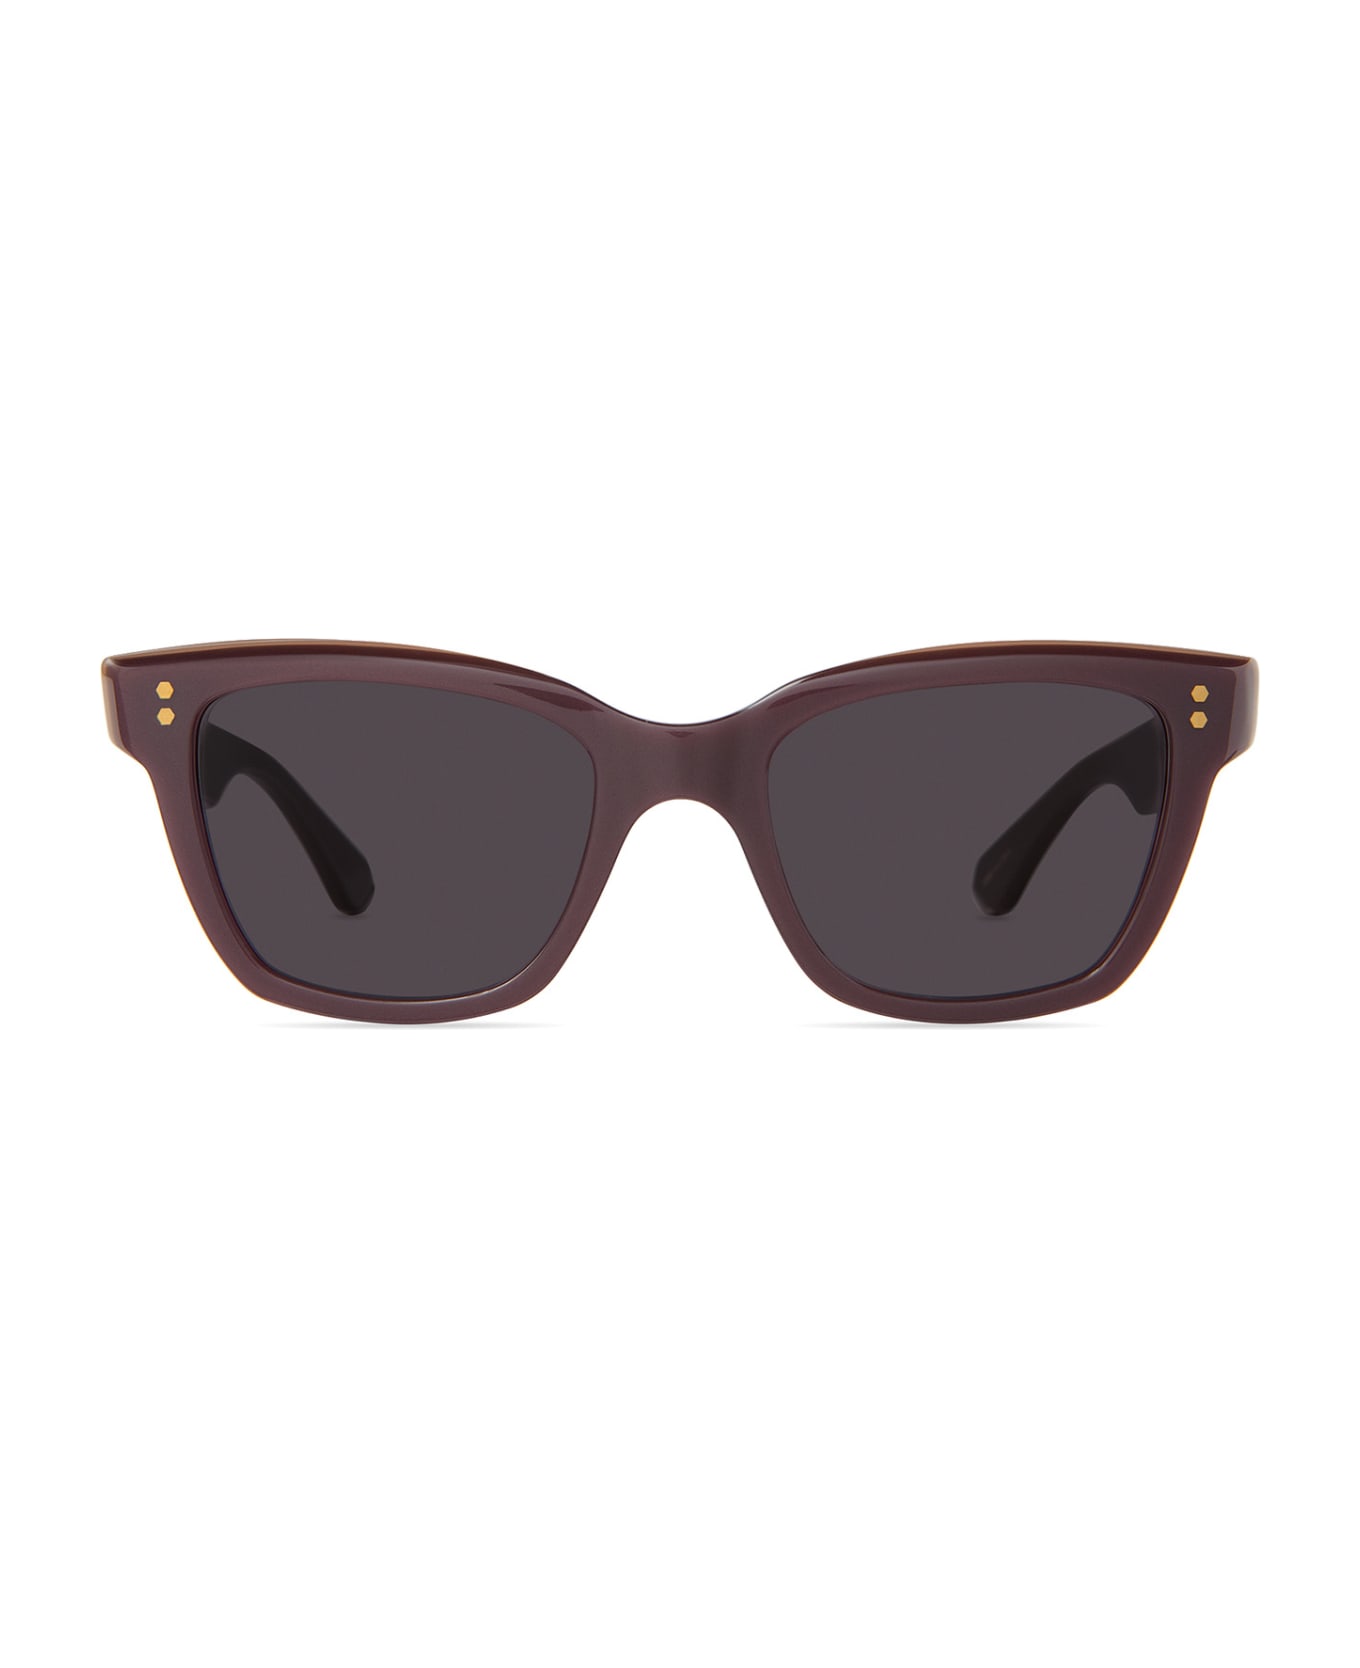 Mr. Leight Lola S Mulberry Laminate-gold Sunglasses - Mulberry Laminate-Gold